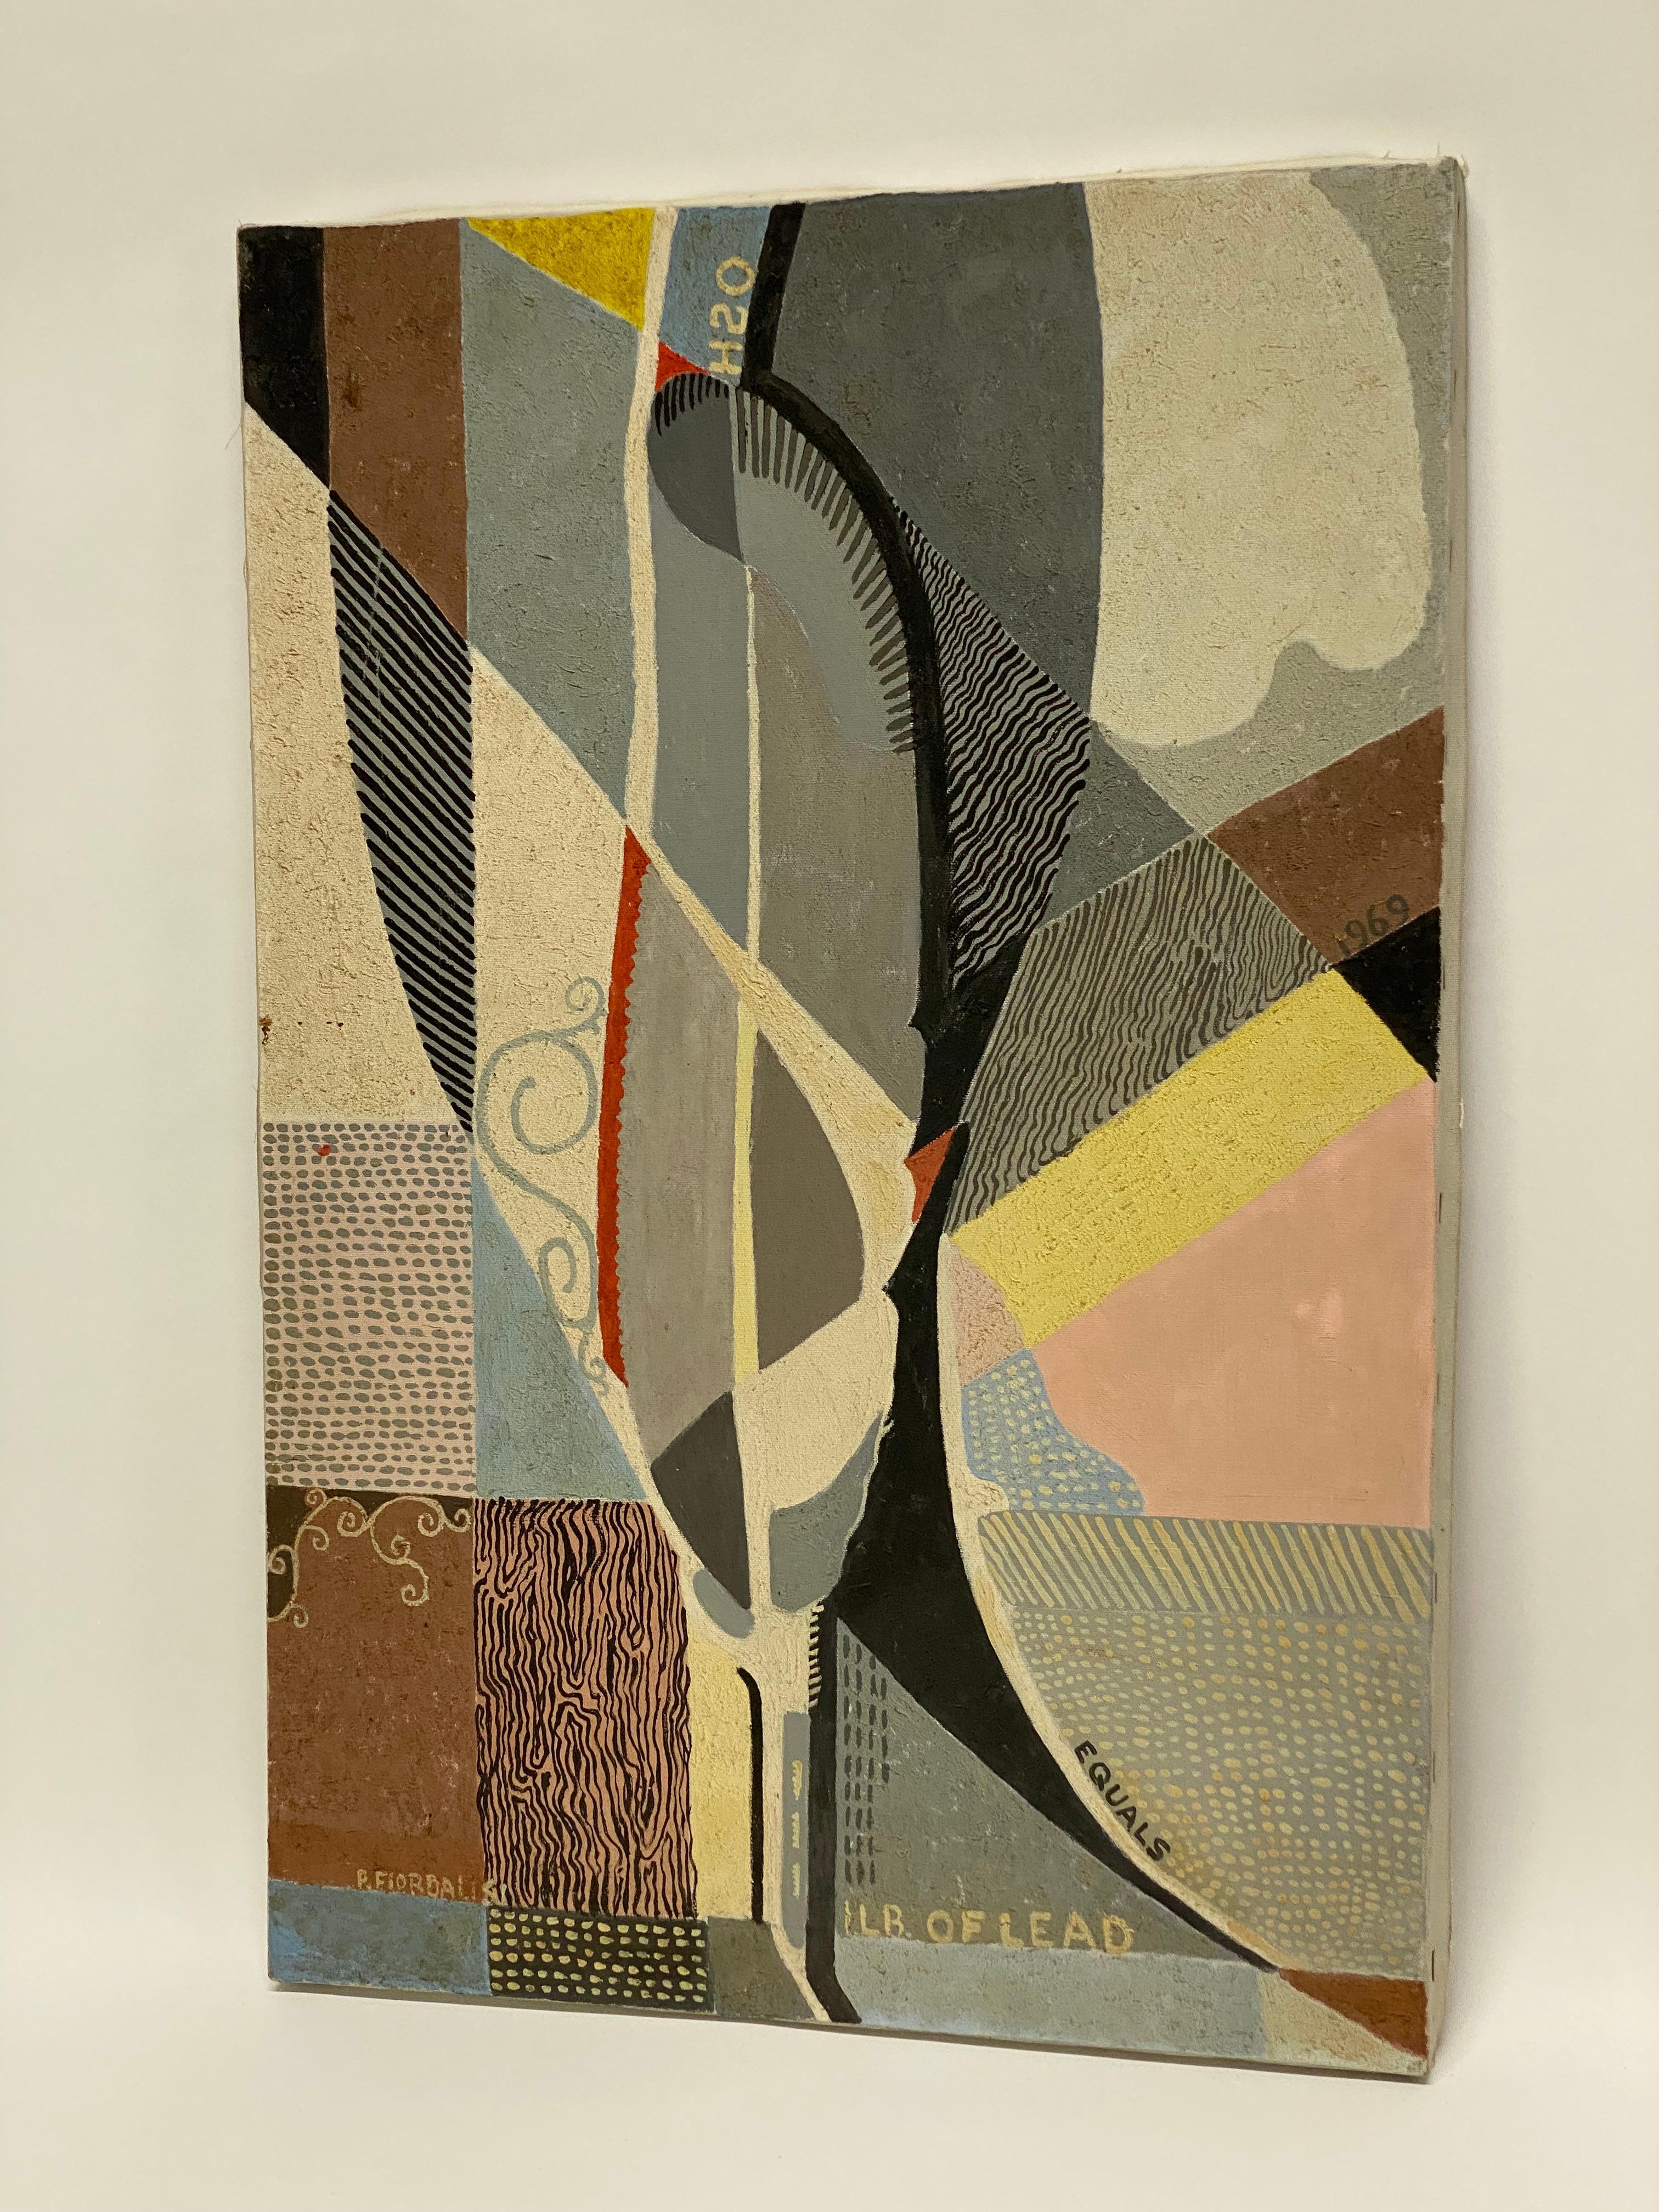 Signed lower left P. Fiordalisi (1904-?). Peter Fiordalisi was born in Union City, NJ and produced this fine abstract oil paint on canvas circa 1969. The artist uses segmented color, lyrical line and words in this finely worked canvas. Unframed.